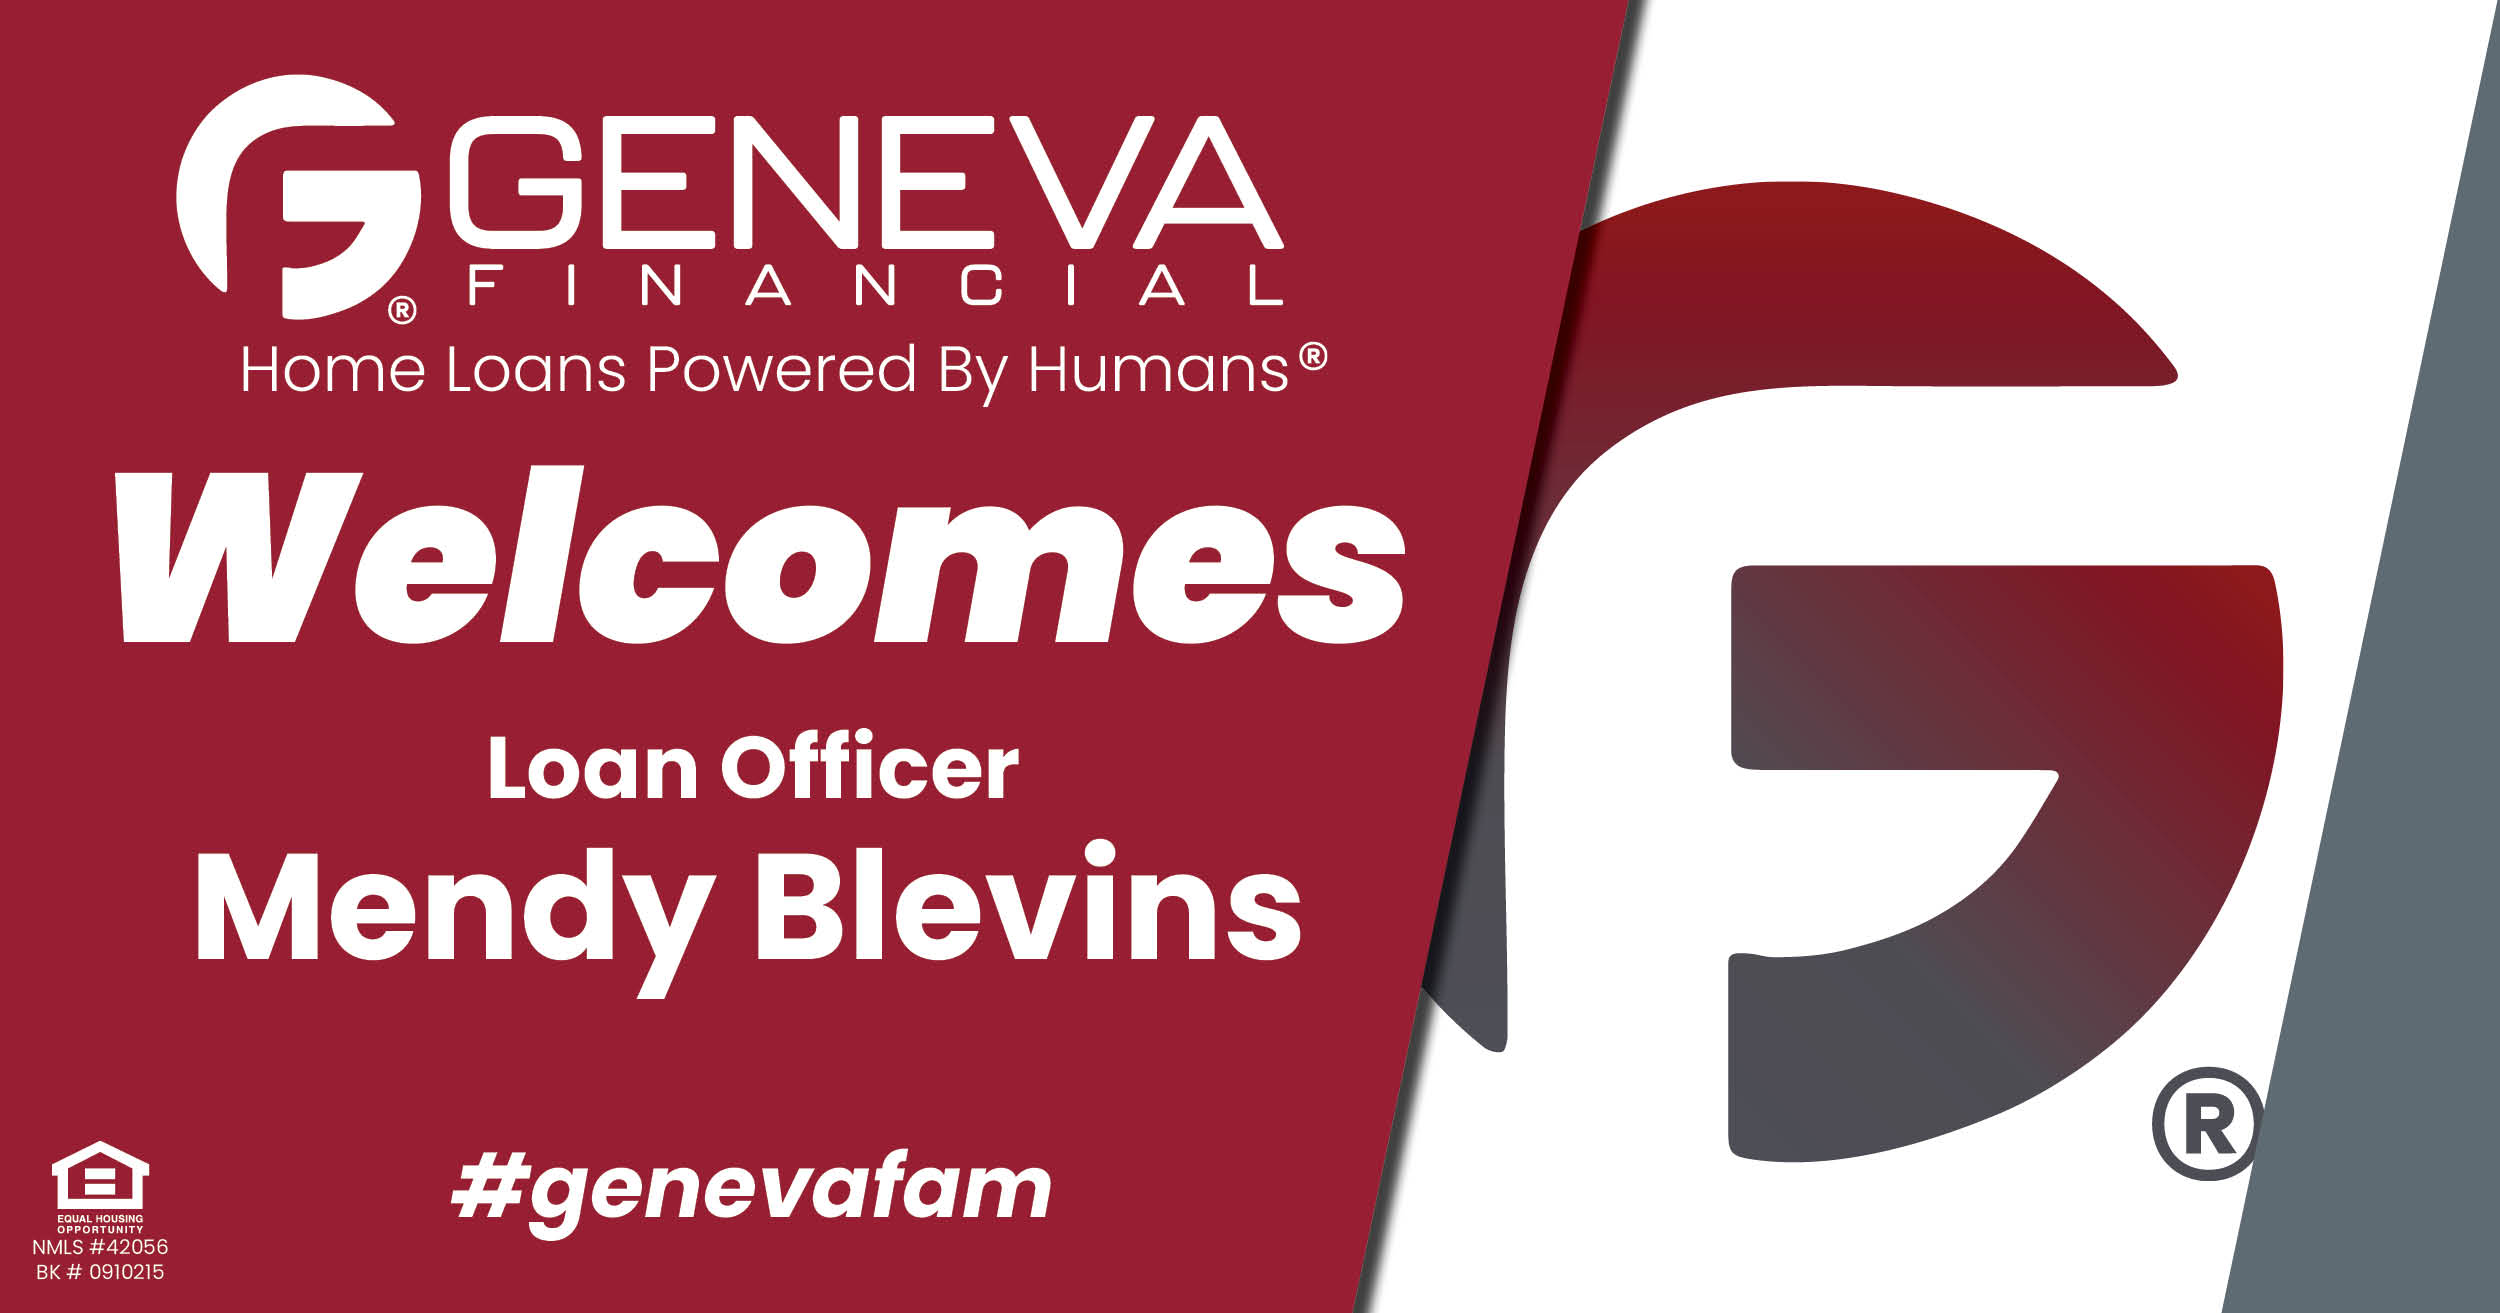 Geneva Financial Welcomes New Loan Officer Mendy Blevins to Pflugerville, Texas – Home Loans Powered by Humans®.